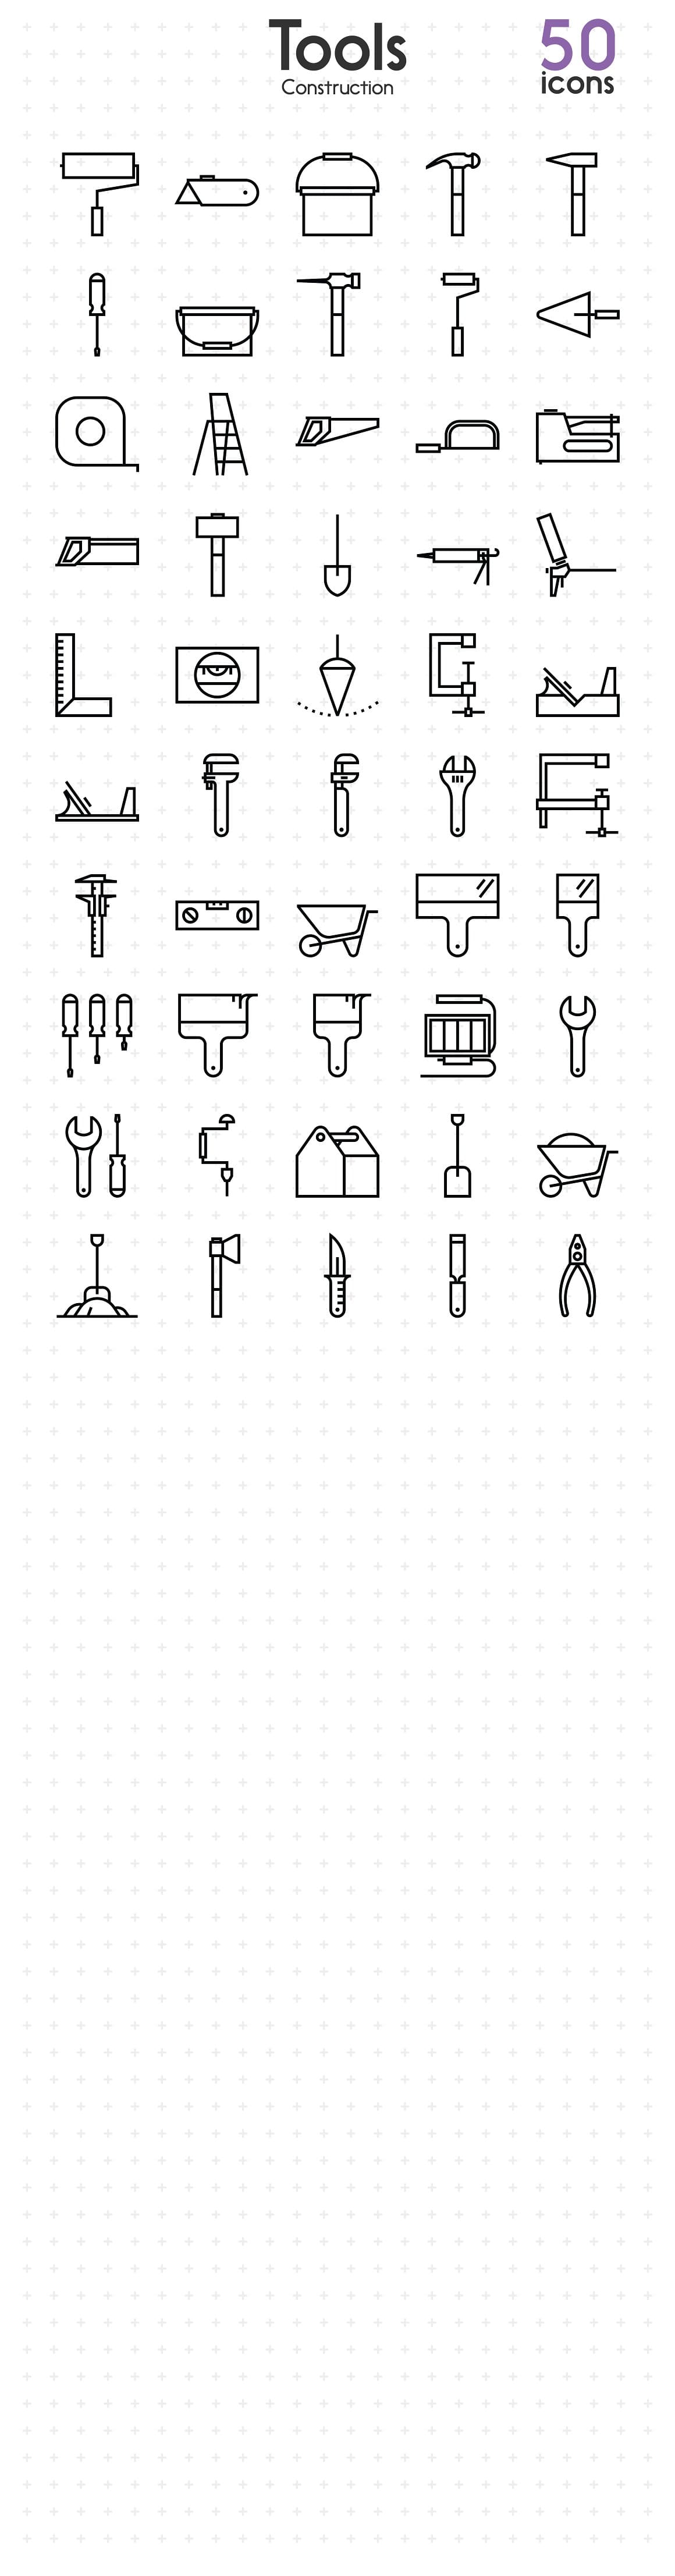 Construction Tools 50 icons.